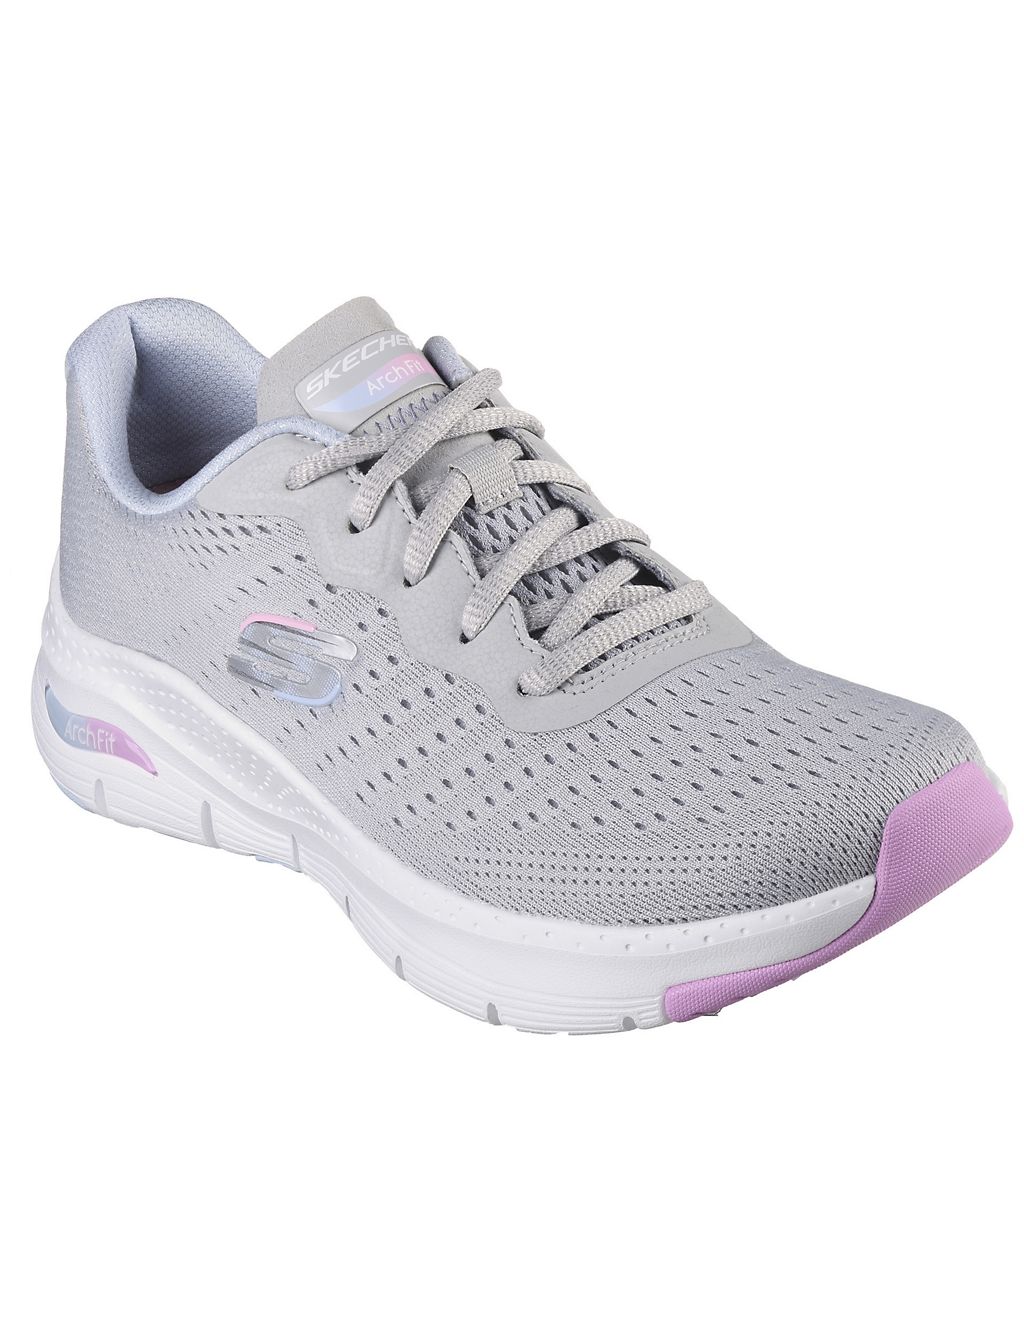 Arch Fit™ Infinity Lace Up Mesh Trainers 1 of 5